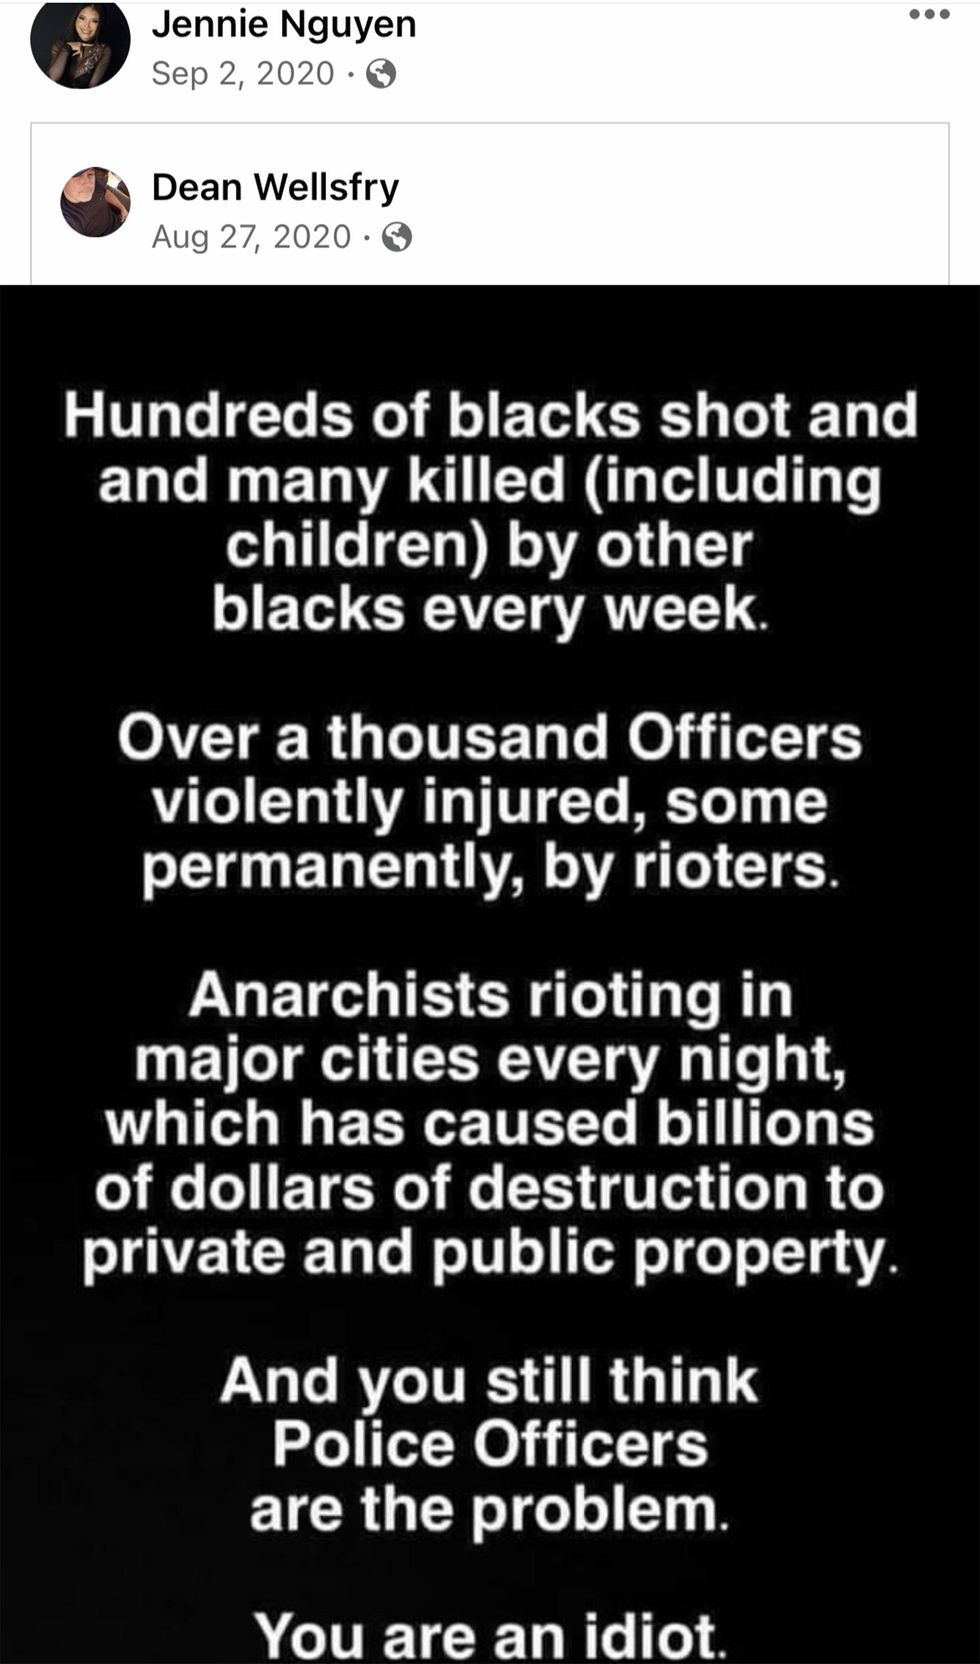  Hundreds of blacks shot and many killed (including children) by other blacks every other week. Over a thousand officers violently injured, some permanently, by rioters. Anarchists rioting in major cities every night, which has caused billions of dollars of destruction to private and public property. And you still think police officers are the problem. You are an idiot. 